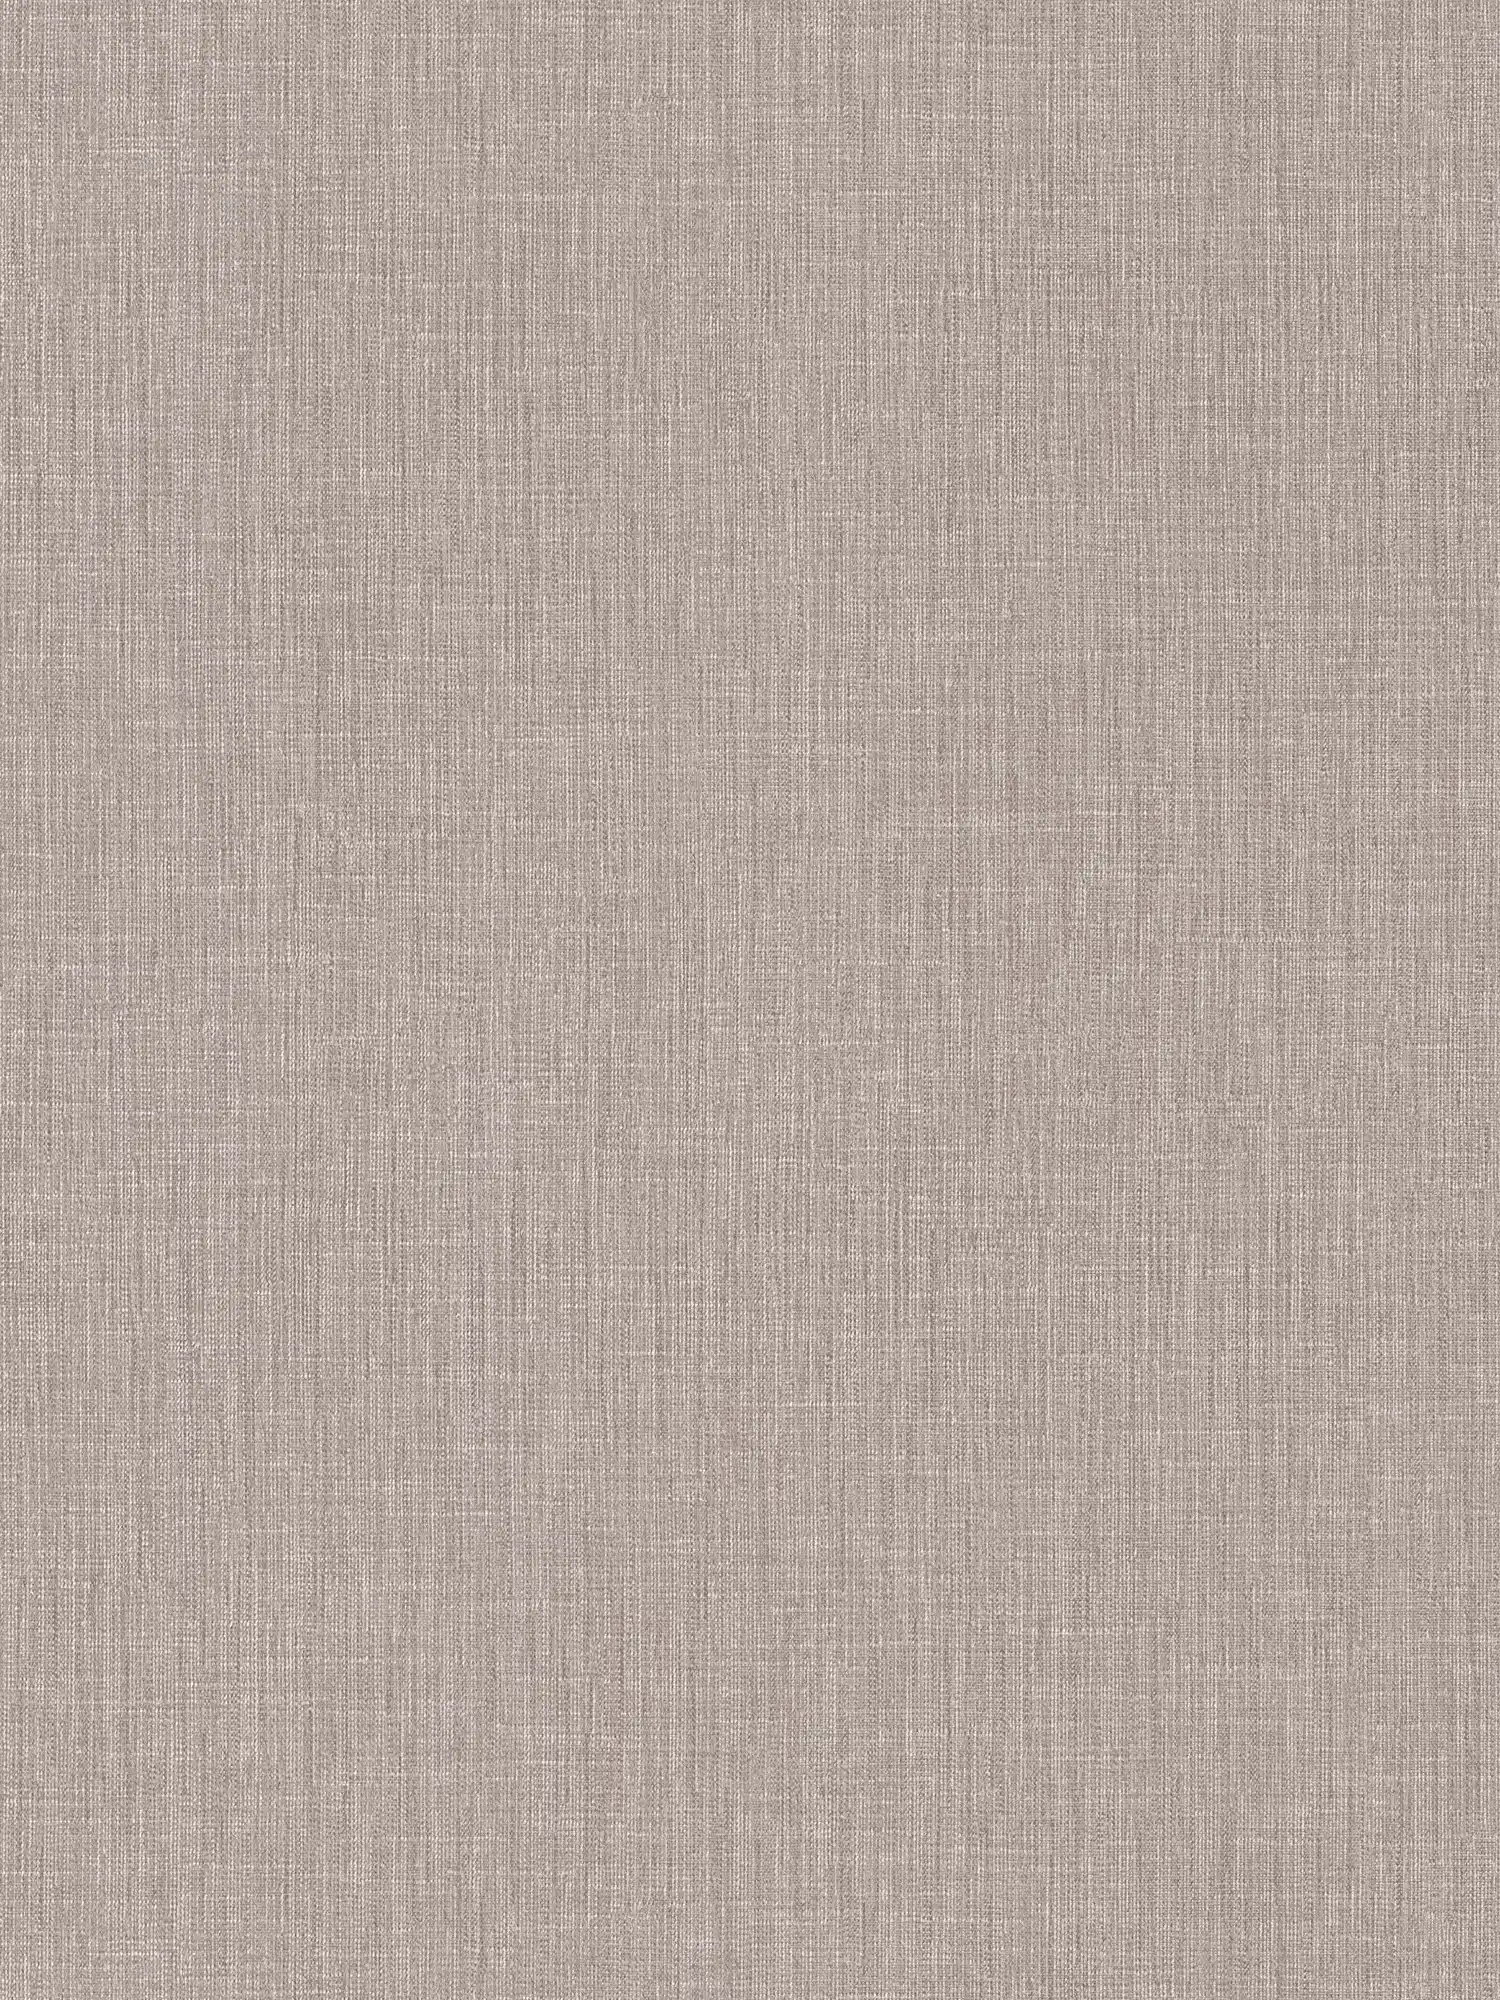 Hatched plain wallpaper with tone-on-tone pattern - beige, cream, white
